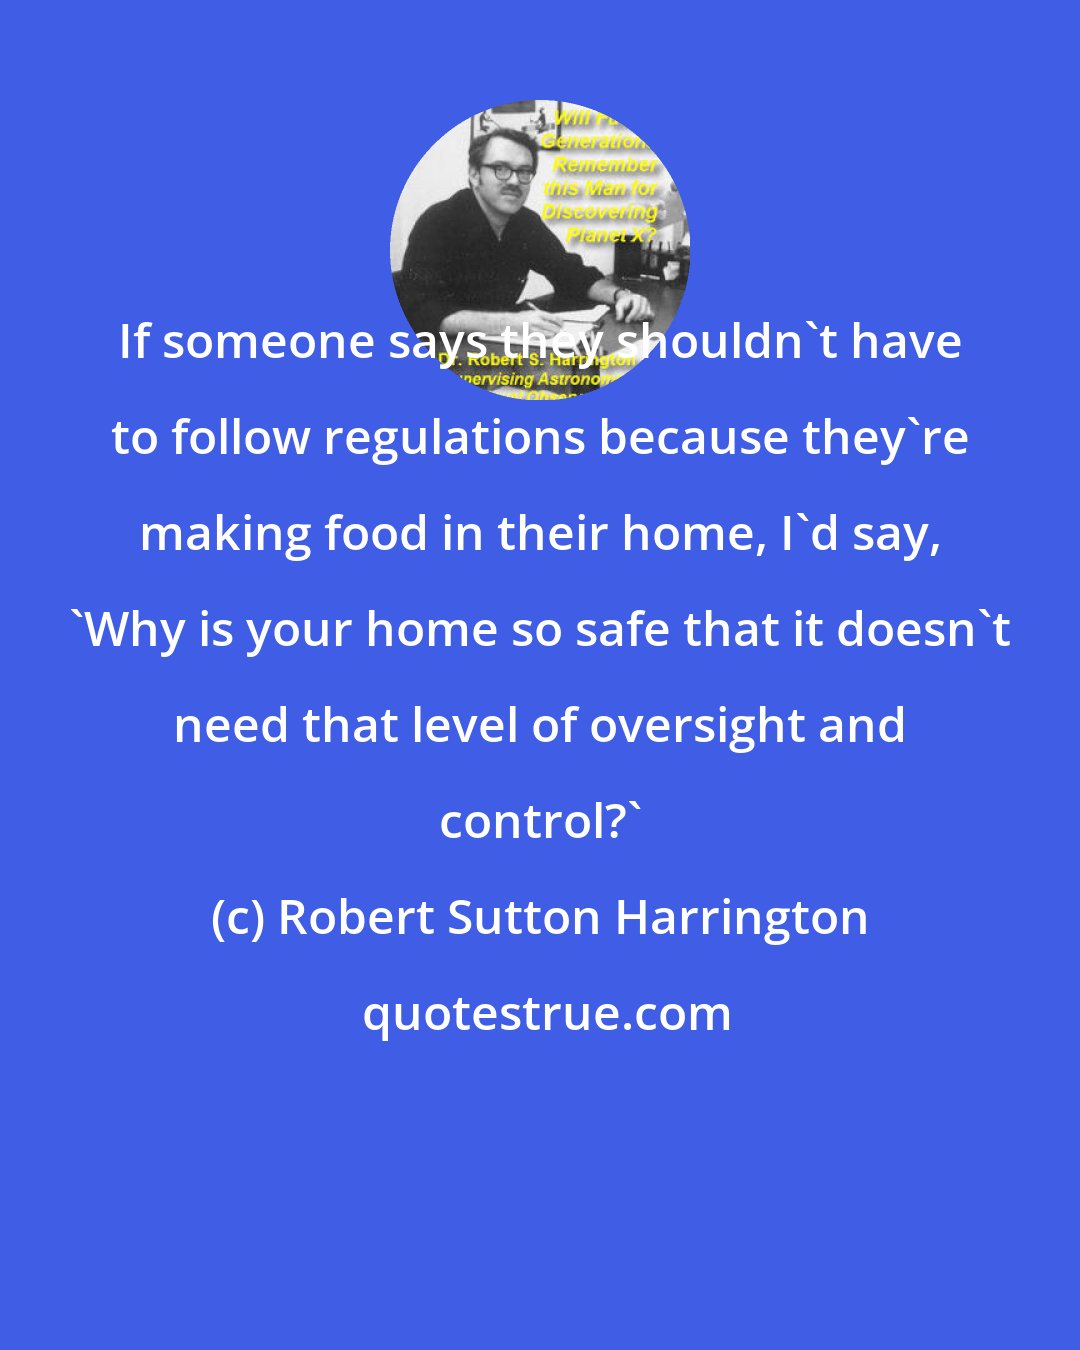 Robert Sutton Harrington: If someone says they shouldn't have to follow regulations because they're making food in their home, I'd say, 'Why is your home so safe that it doesn't need that level of oversight and control?'